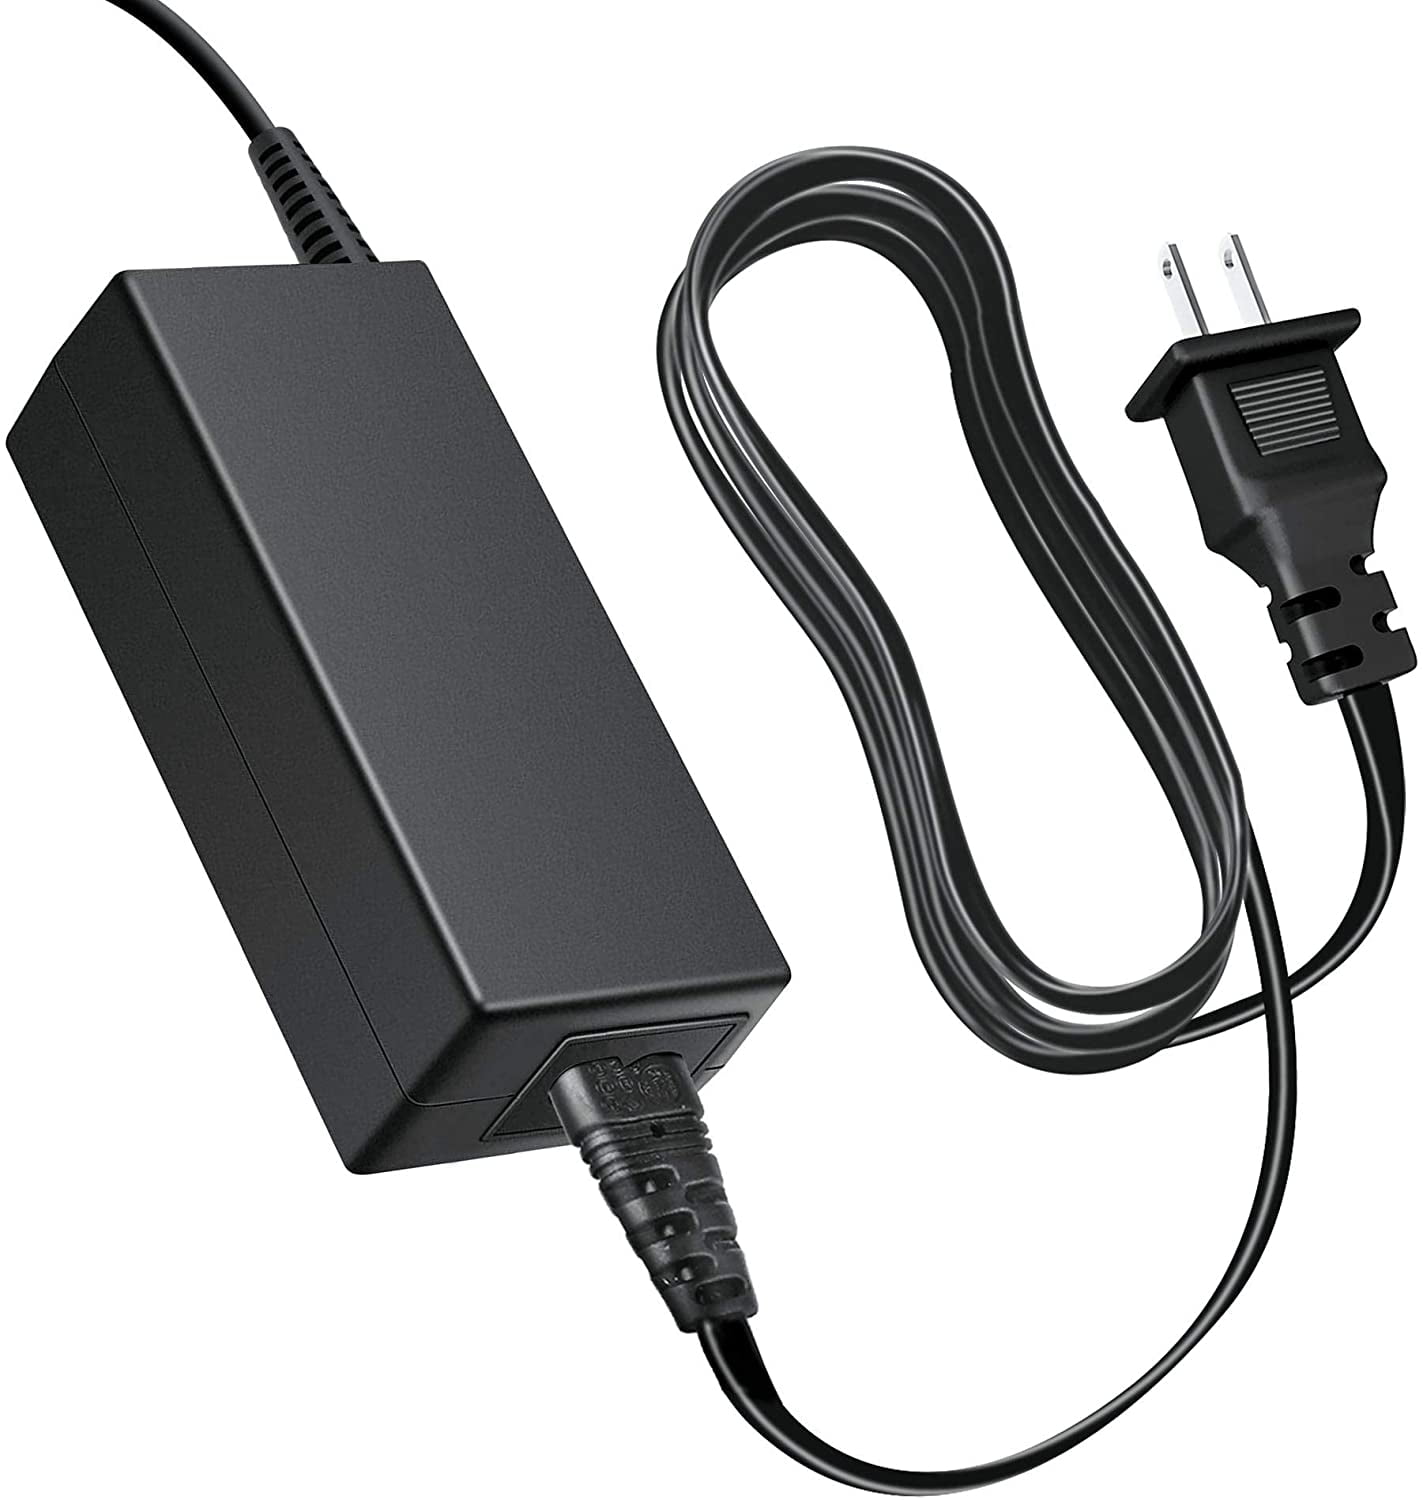 Parthcksi AC / DC Adapter For Zoom MRS-1044 MRS-1044CD MultiTrack Recording  Studio Power Supply Cord Cable Charger Input: 100V - 120V AC - 240 VAC  50/60Hz Worldwide Voltage Use Mains PSU - Walmart.com